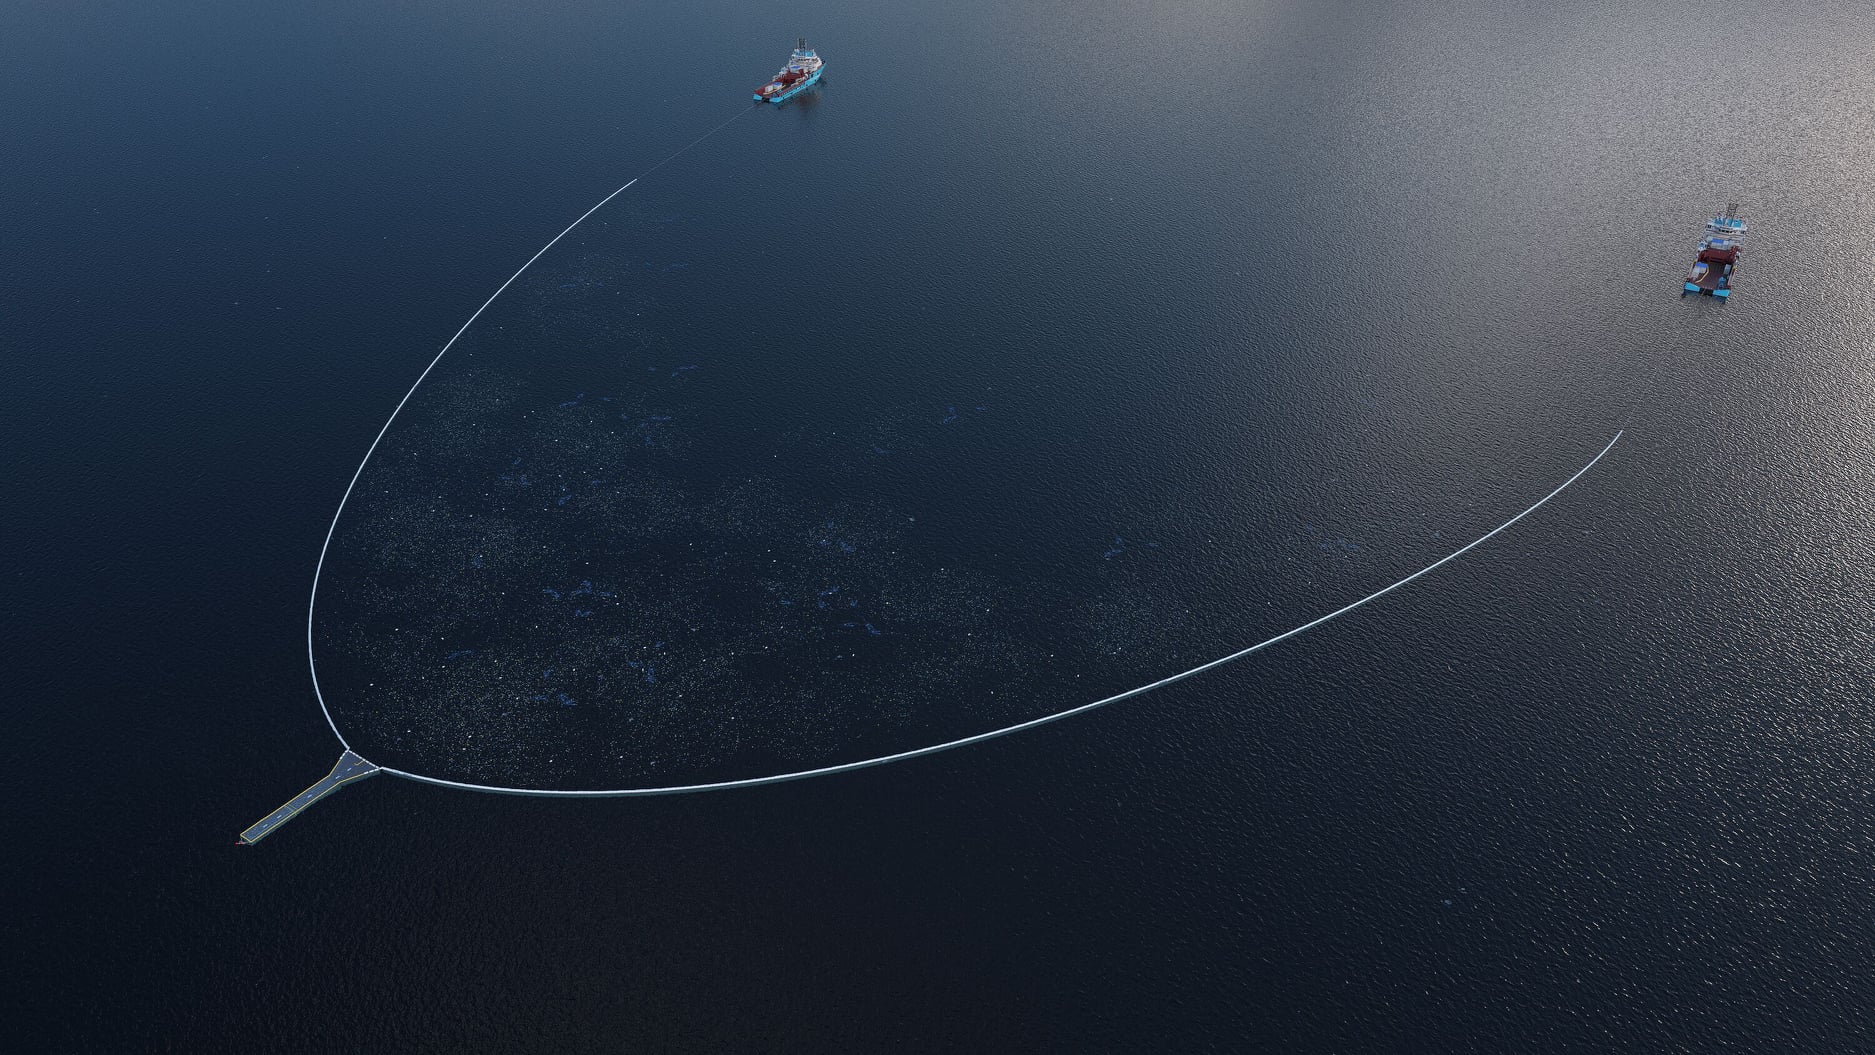 In about two weeks, The Ocean Cleanup are returning to the Great Pacific Garbage Patch (GPGP) with the next iteration of their ocean cleanup design. Based on their learnings from System 001/B, they have now incorporated active propulsion into the design.